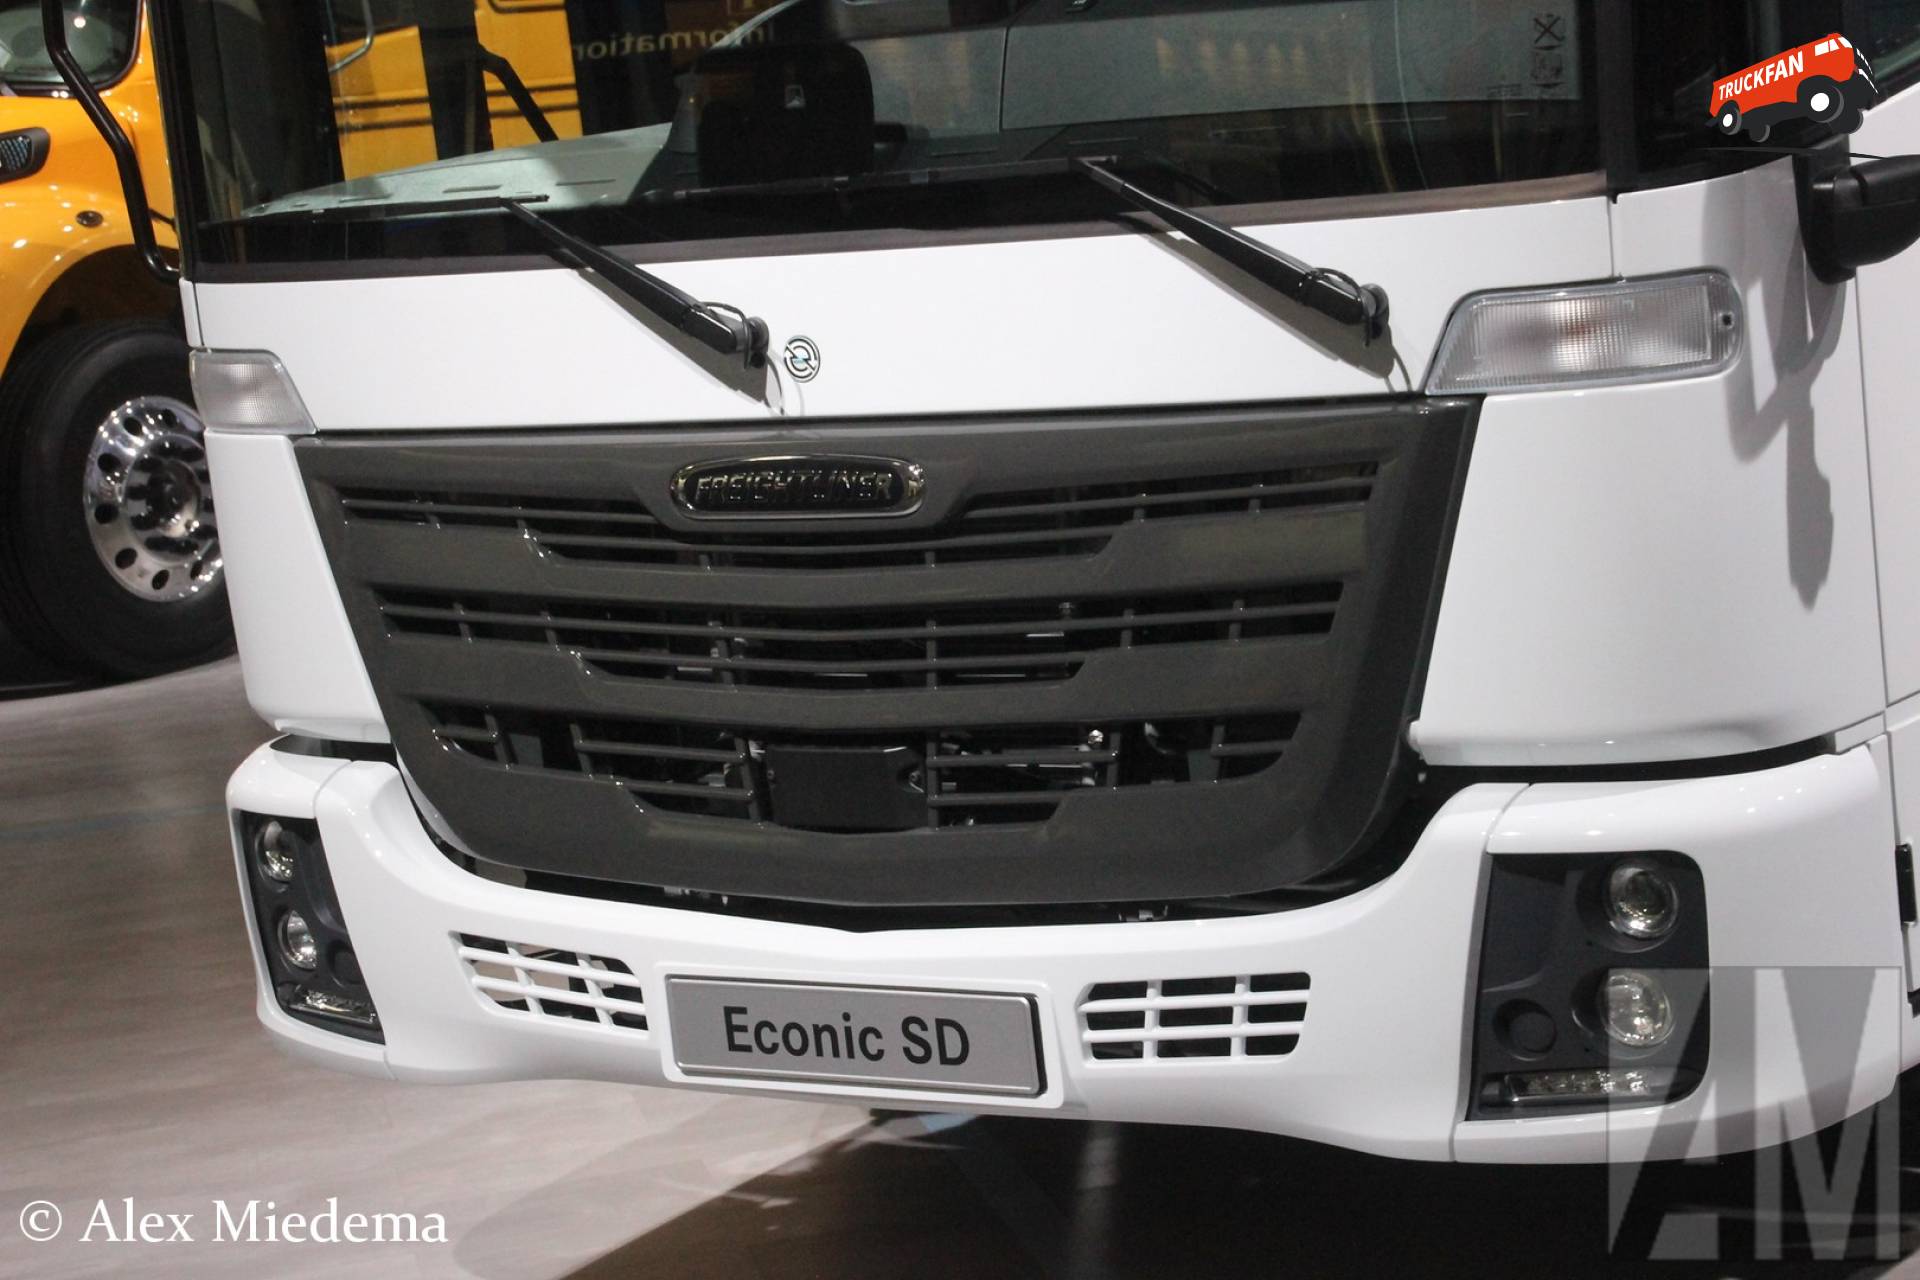 Freightliner Econic SD